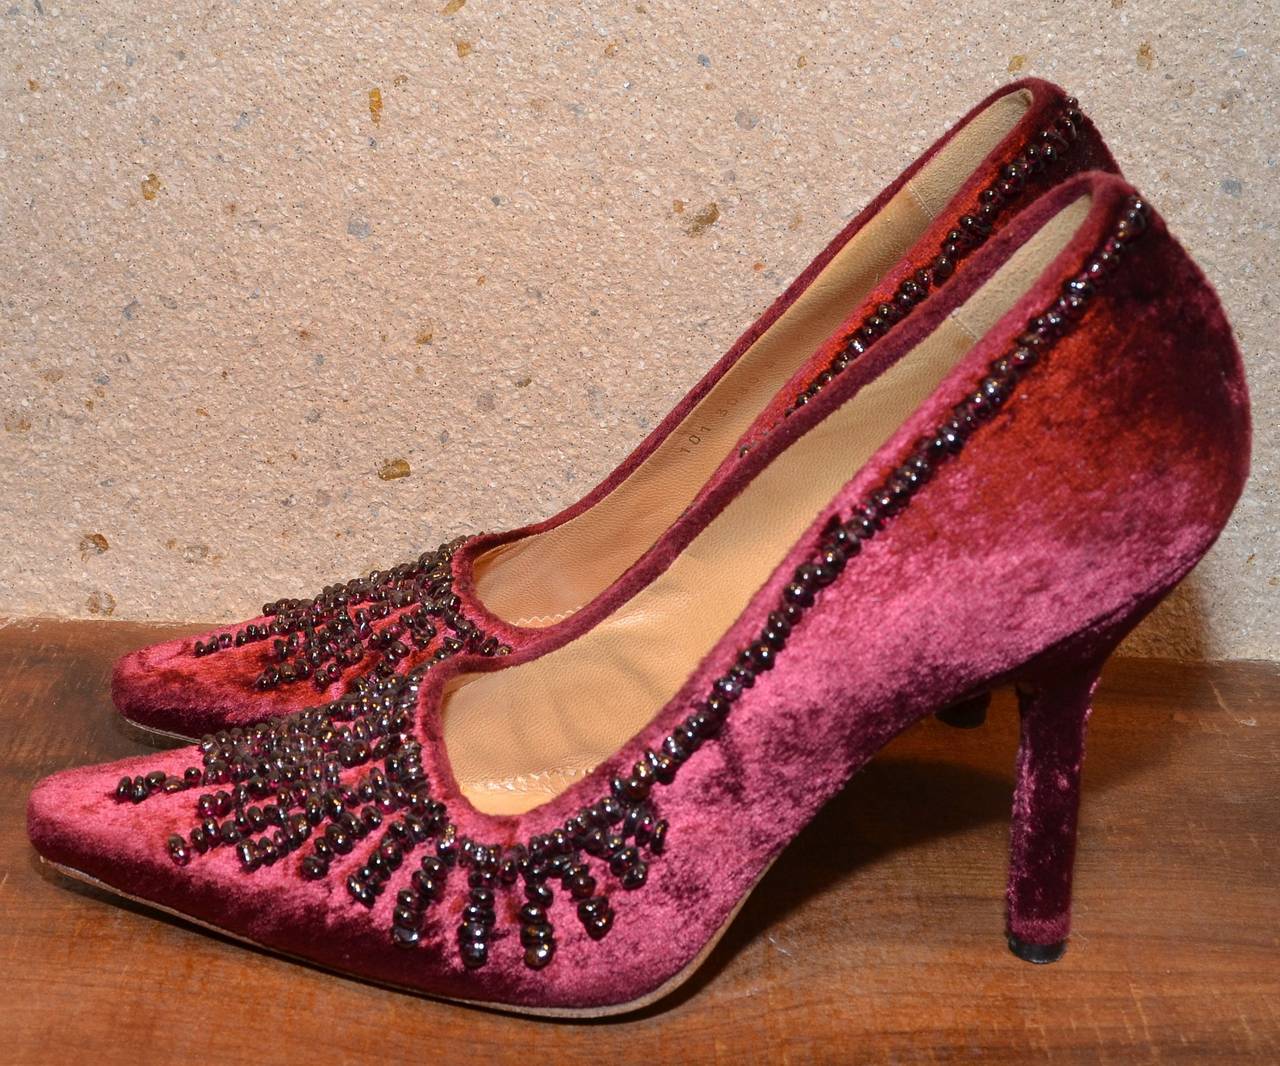 Beautiful Gucci pumps from the Tom Ford era feature a crushed velvet material with genuine garnet stones along the vamp and trim, and have leather insoles and soles. 

Measurements:
Heel Height - 4.5''